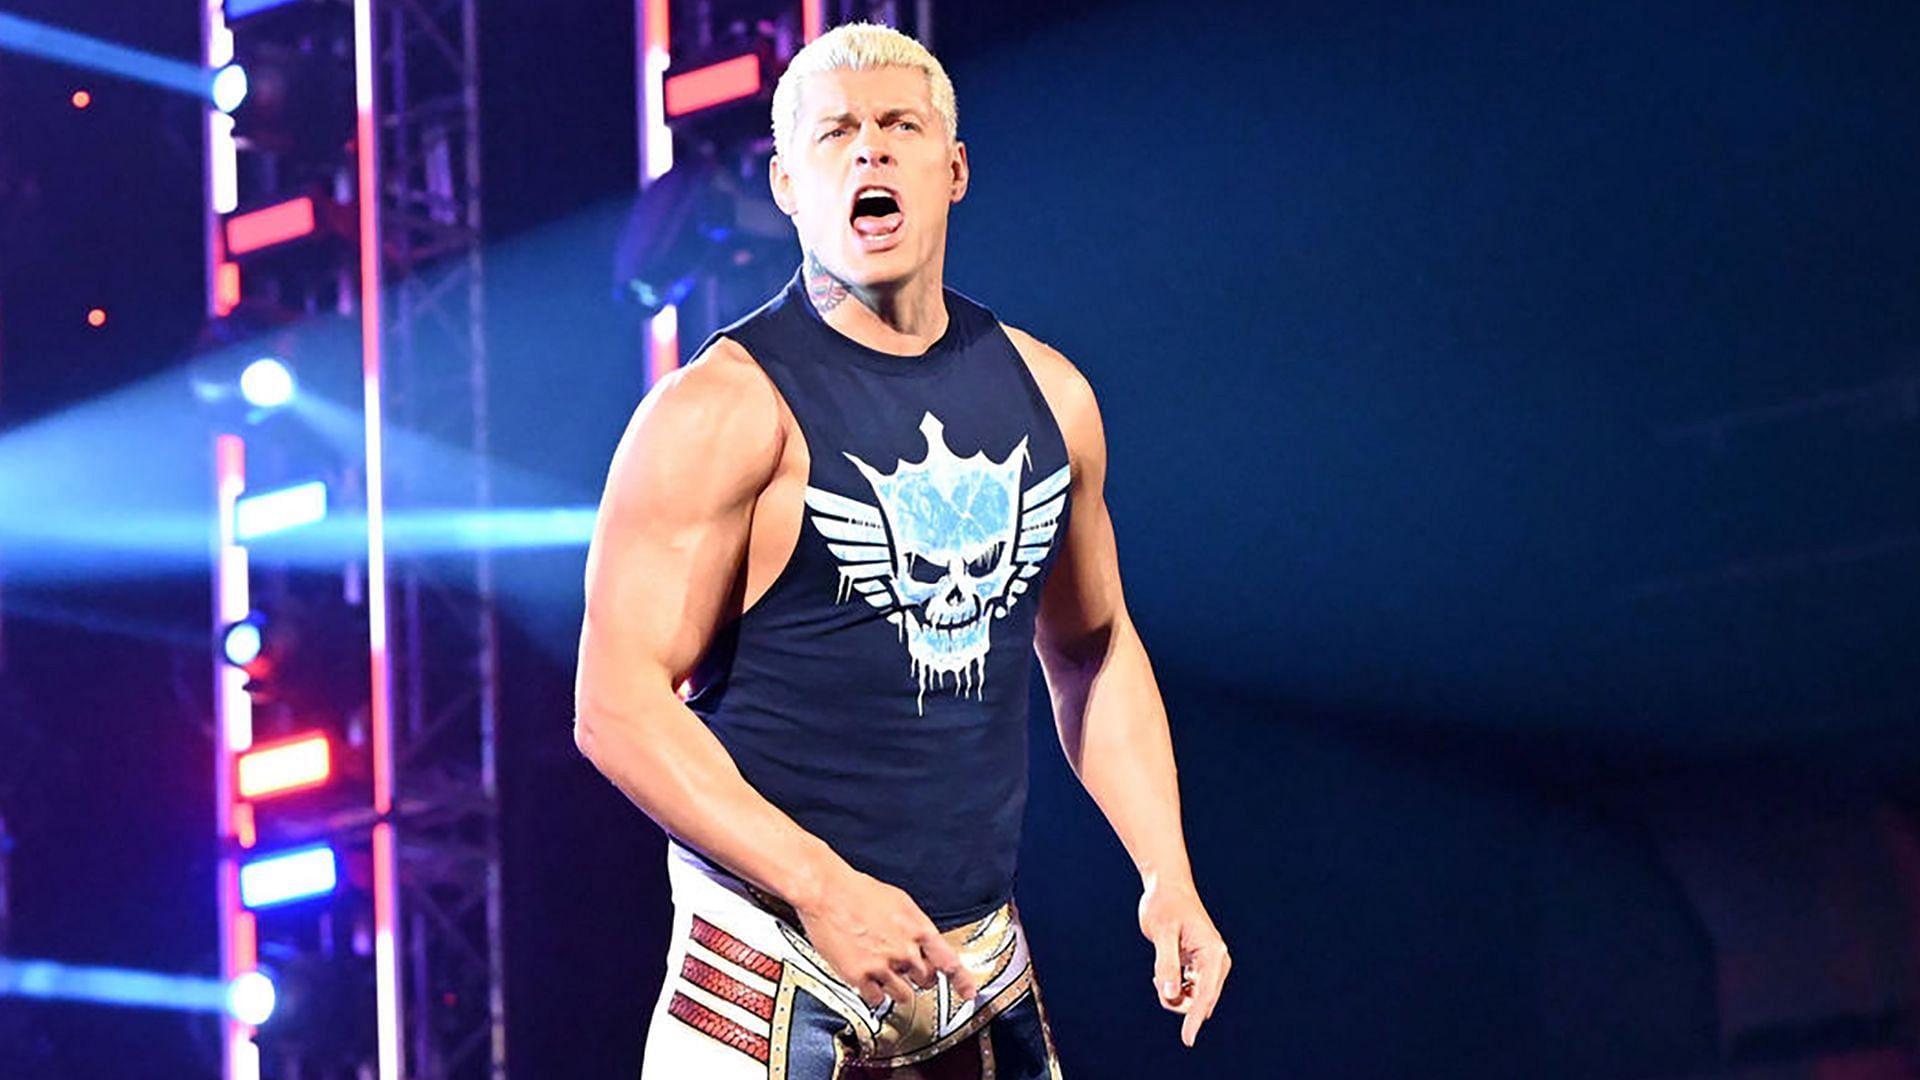 Cody Rhodes poses in the ring on WWE RAW